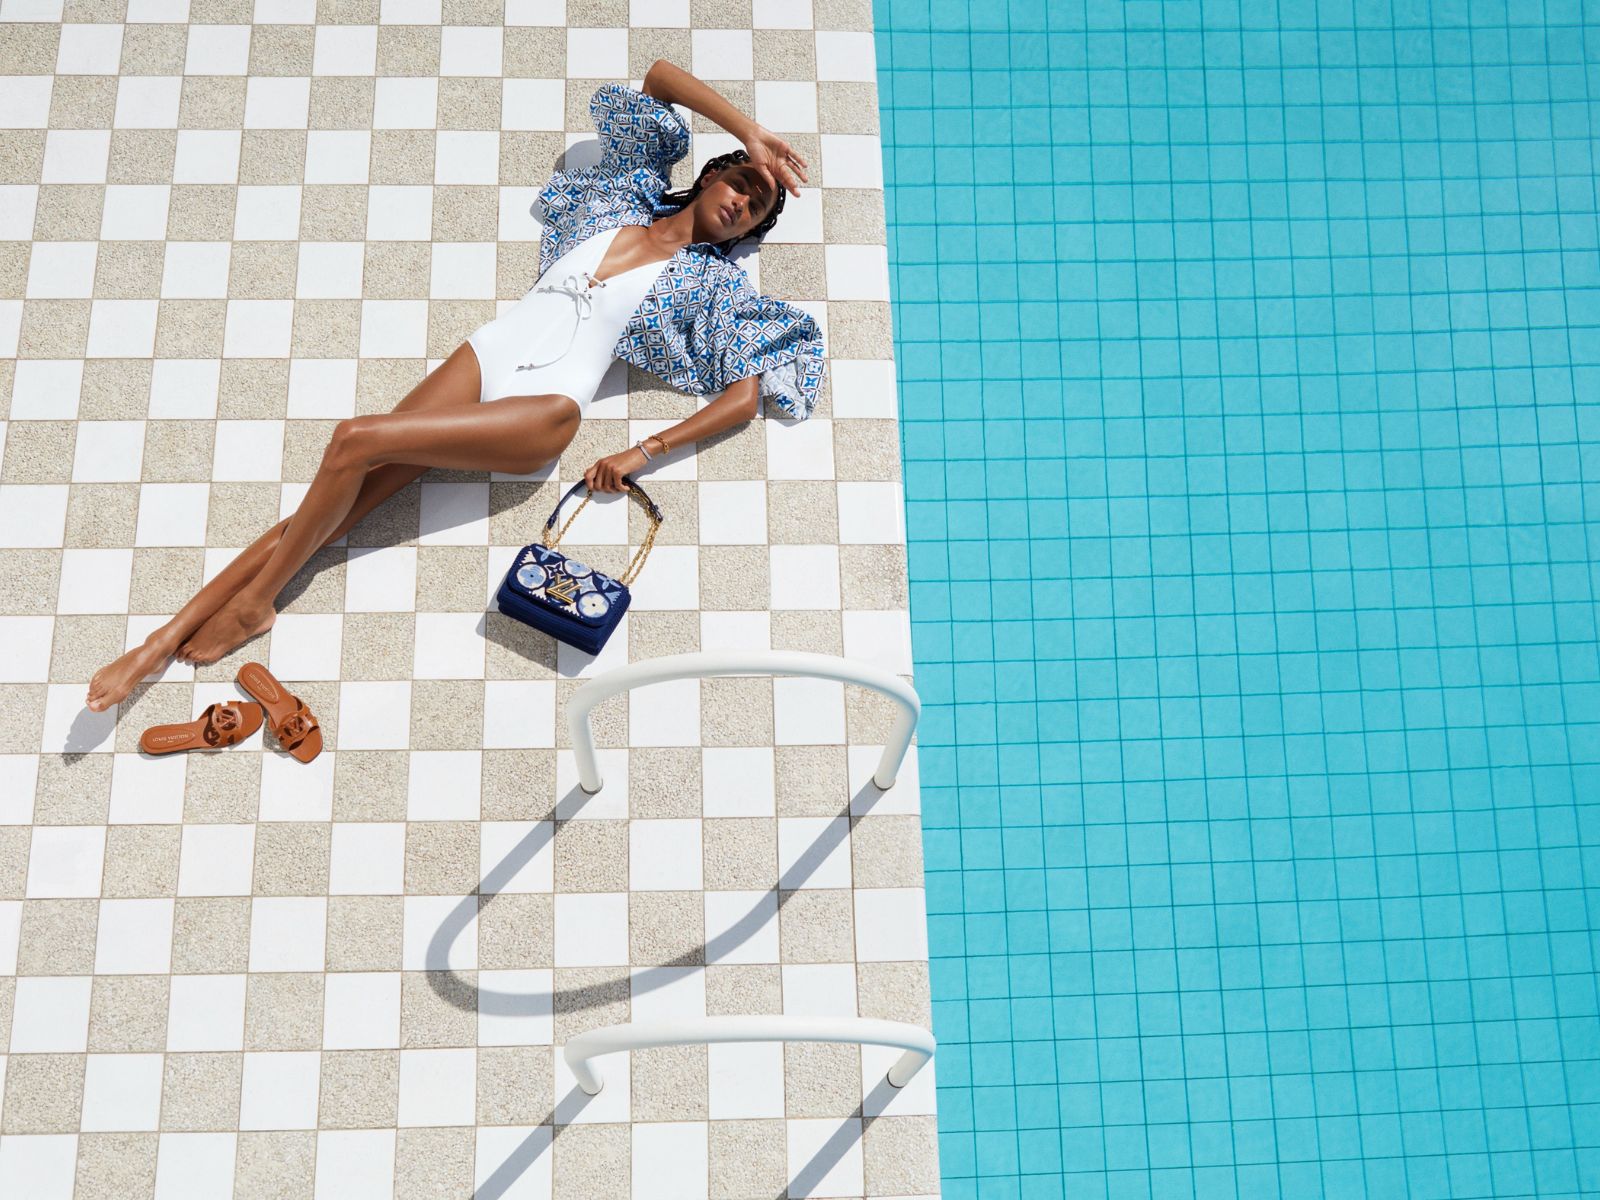 lv by the pool wallpaper